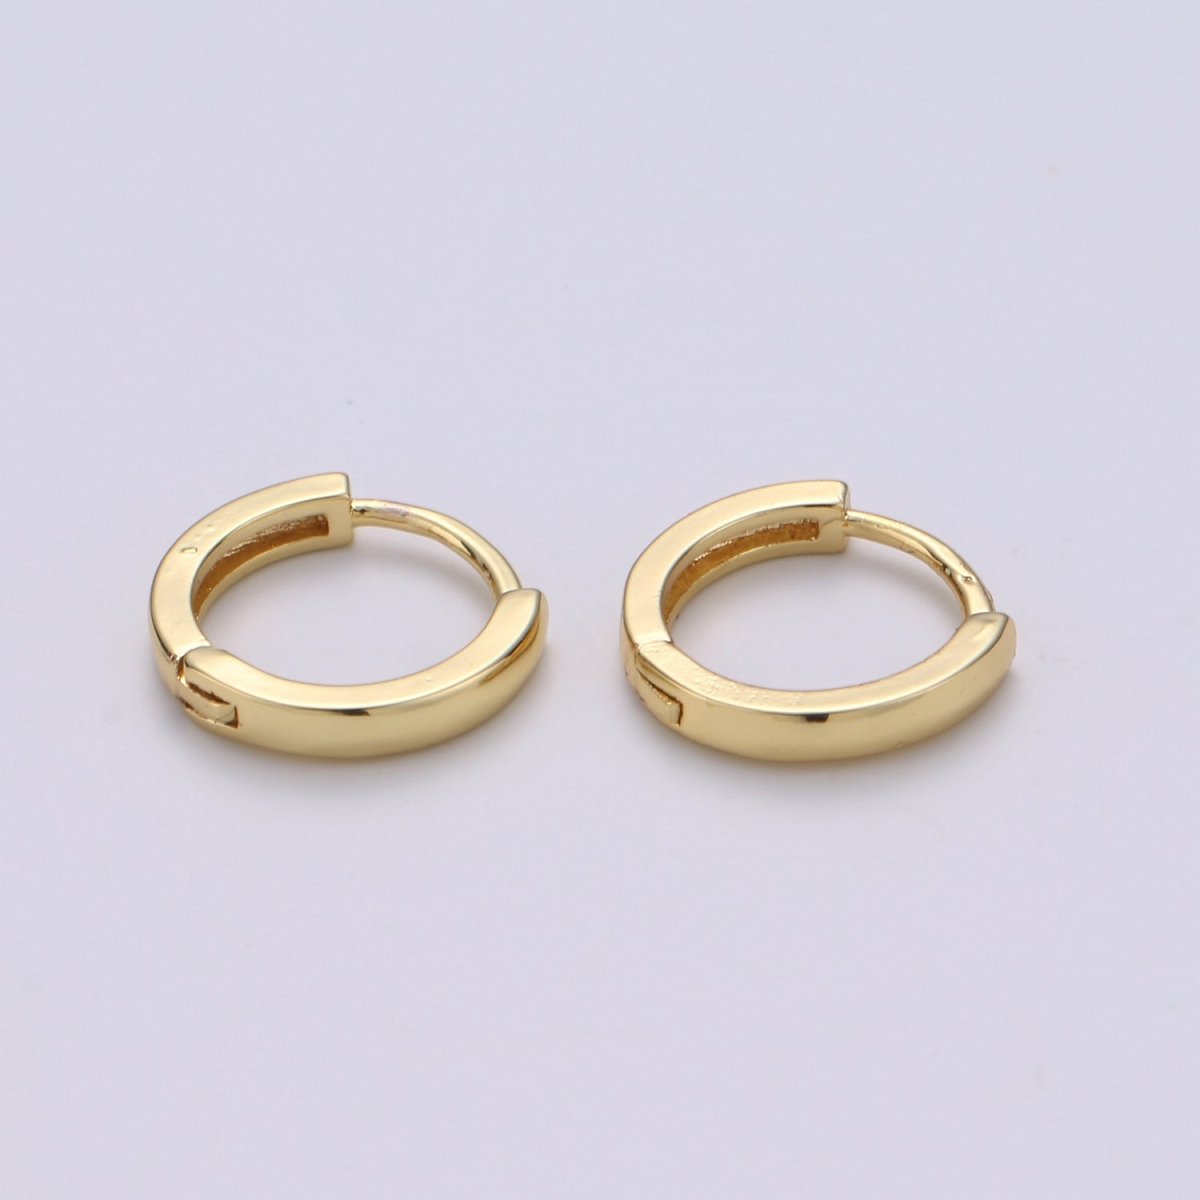 Dainty Hypoallergenic Cartilage Earrings Tiny Hoop Earrings 14K Gold Filled Hoop Tiny Hoop Earrings Small Huggie Minimalist Dainty Hoops for Gift idea Q-186 Q-224 Q-494 - DLUXCA